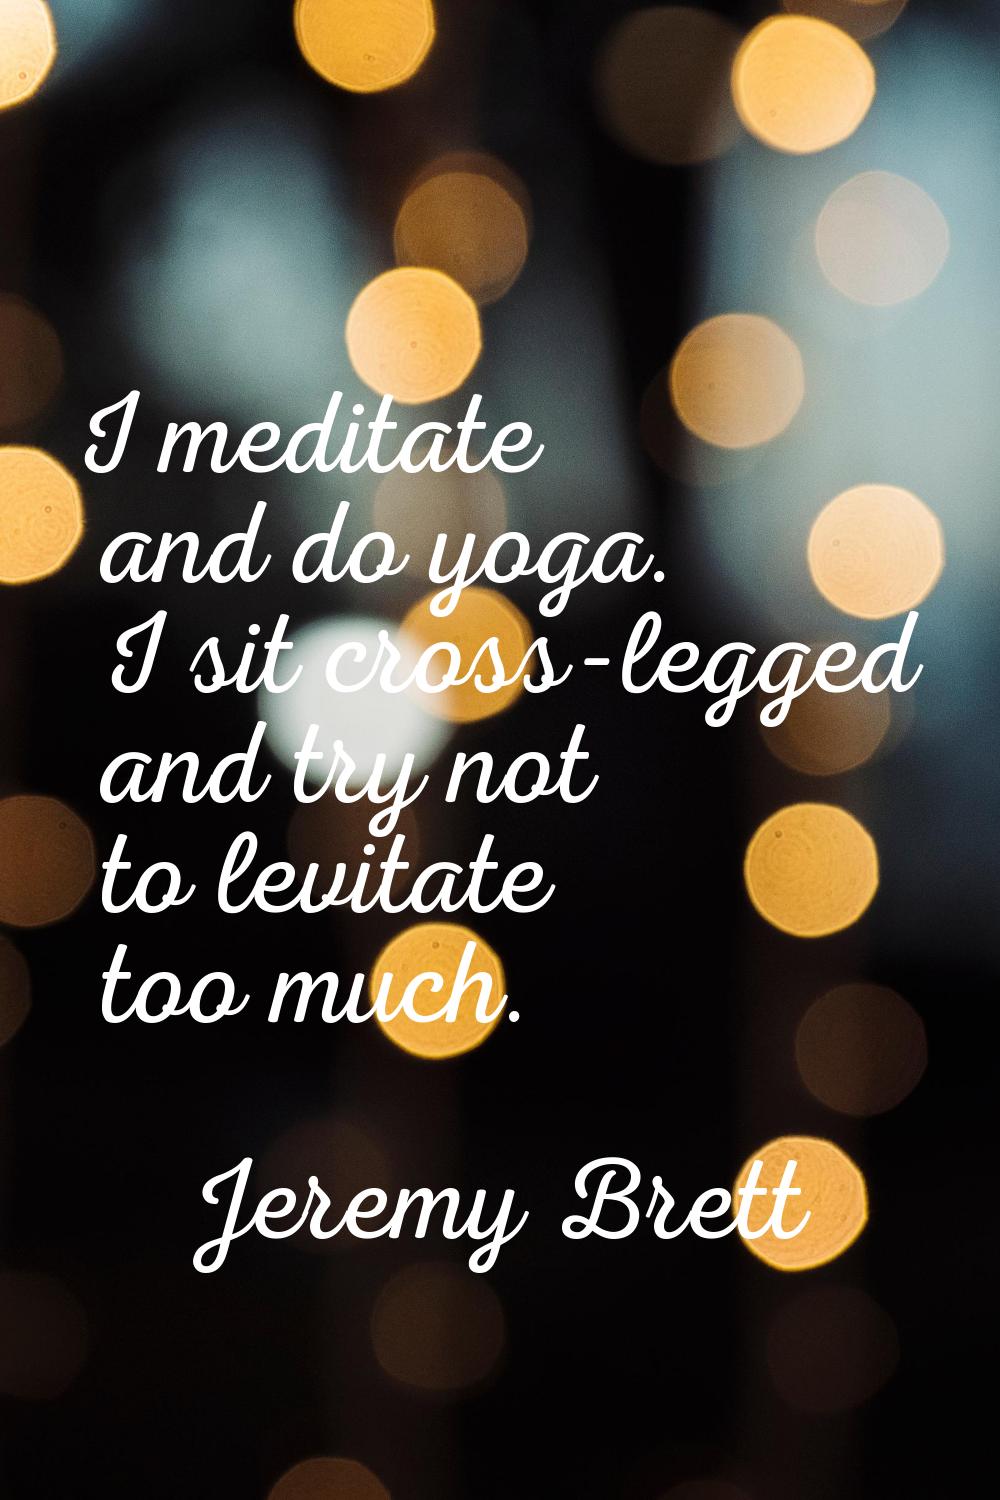 I meditate and do yoga. I sit cross-legged and try not to levitate too much.